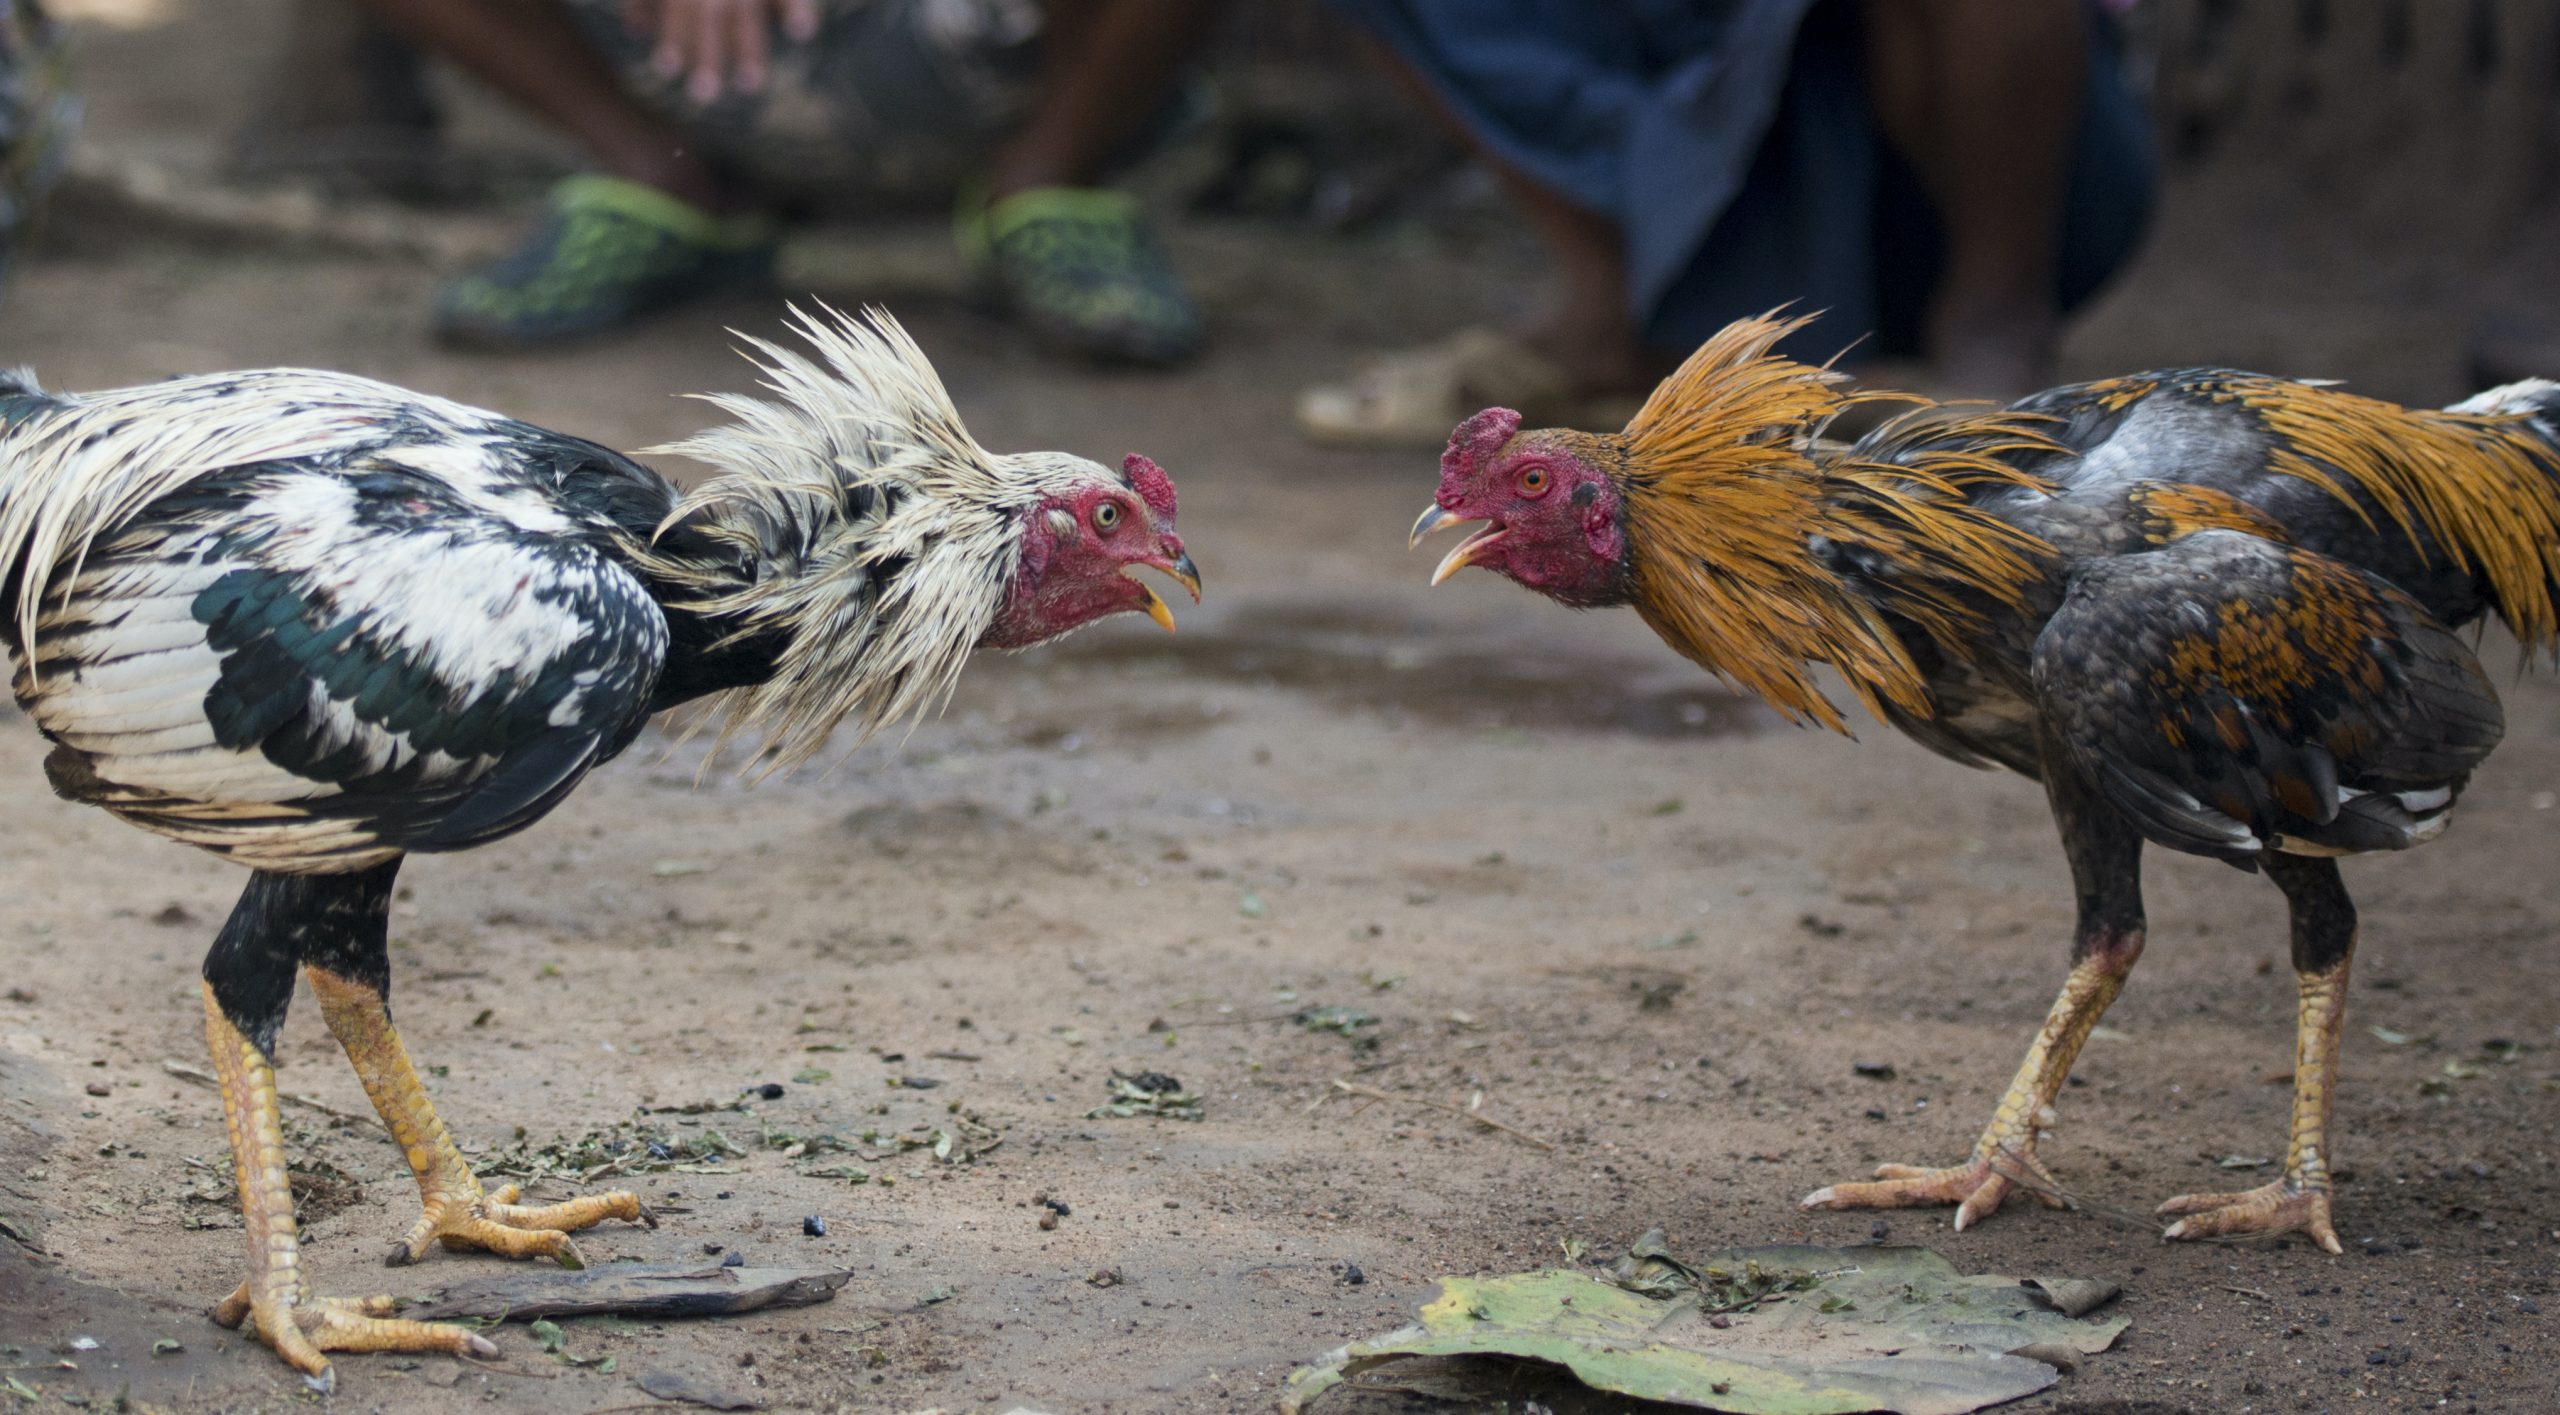 two roosters facing each other on dirt ground